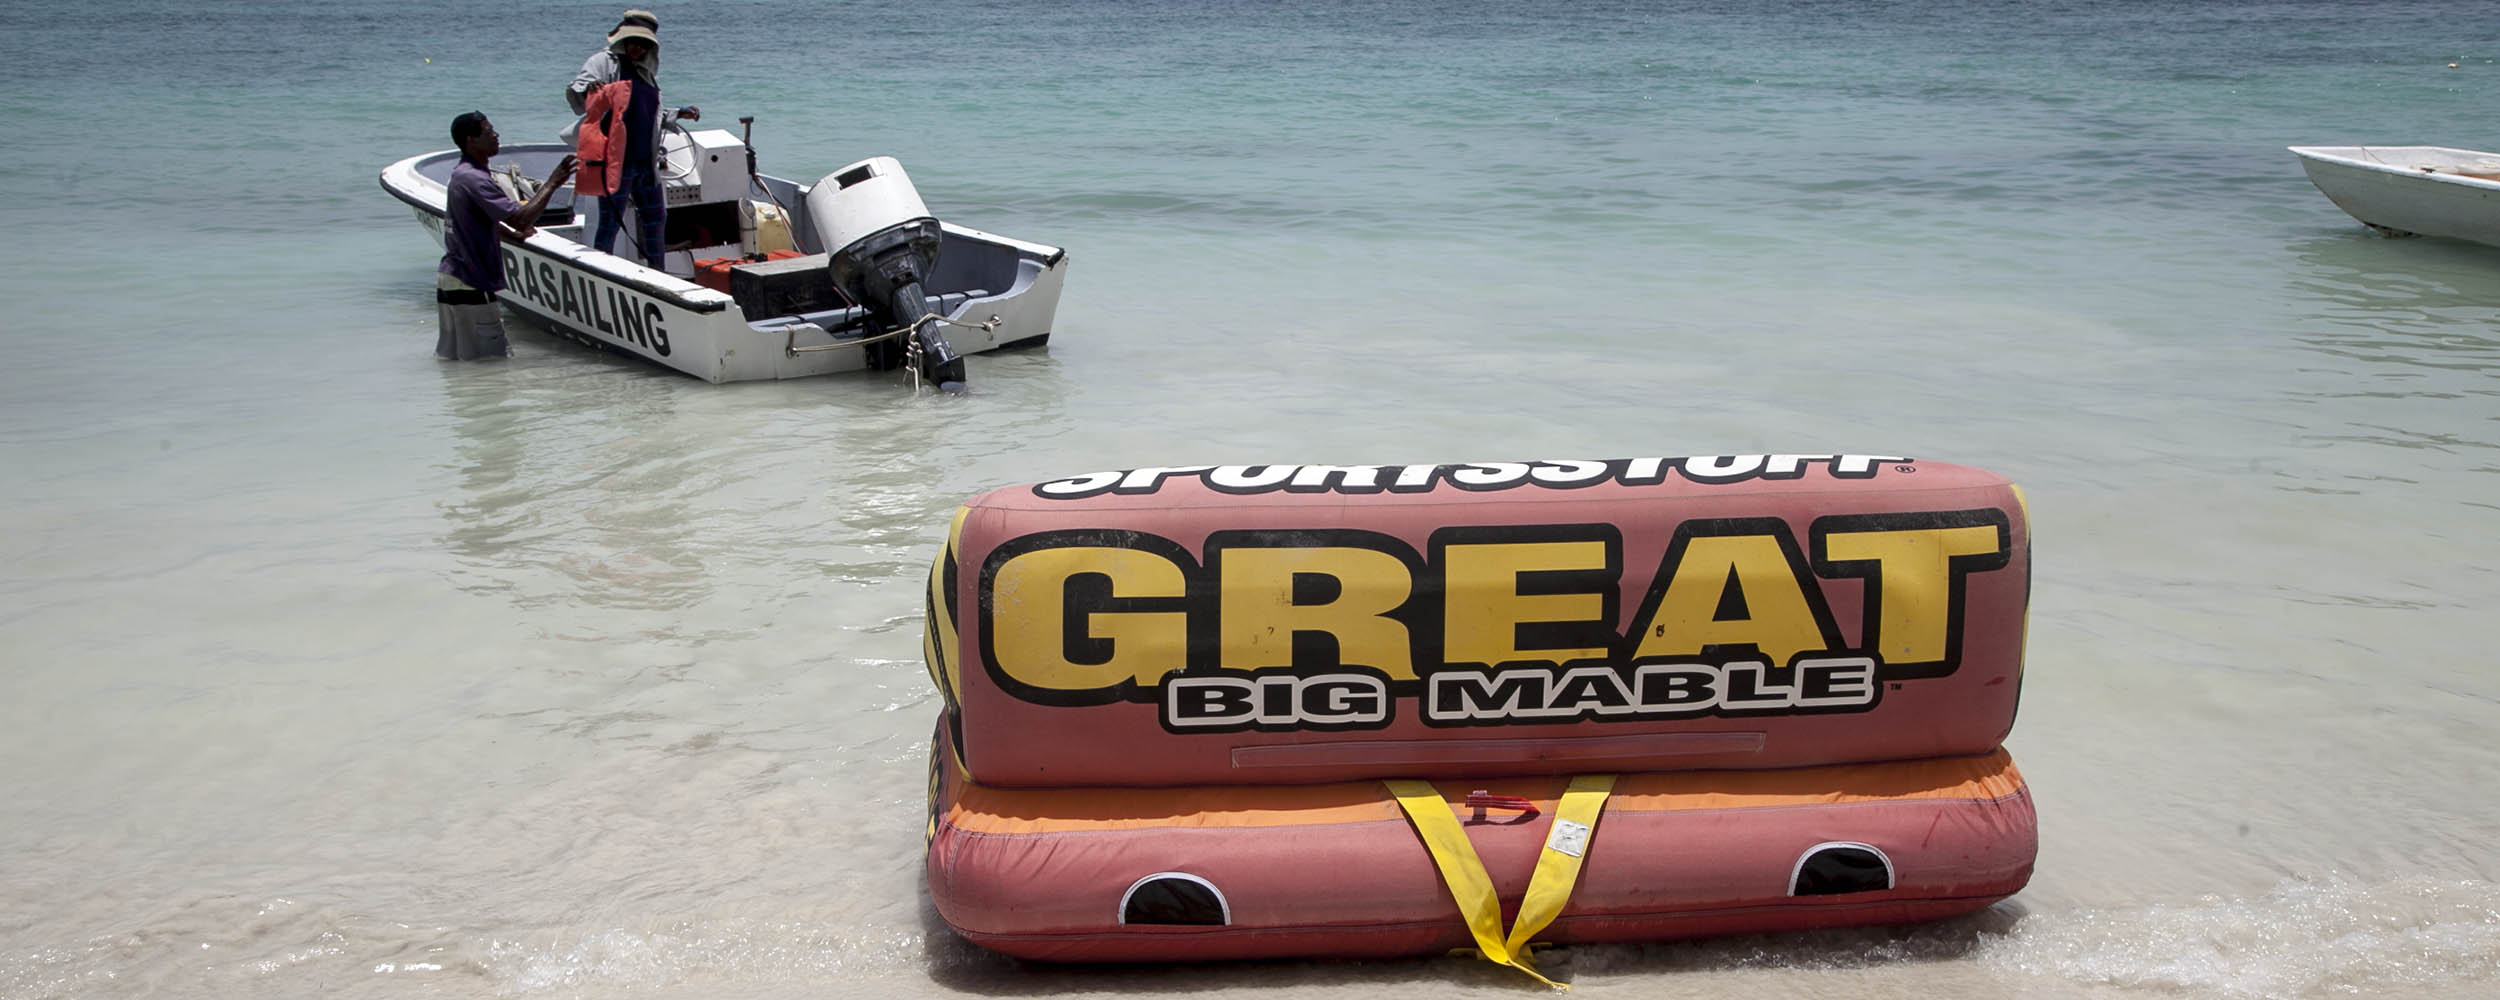 Ray's Water Sports - Negril Beach, Negril Jamaica